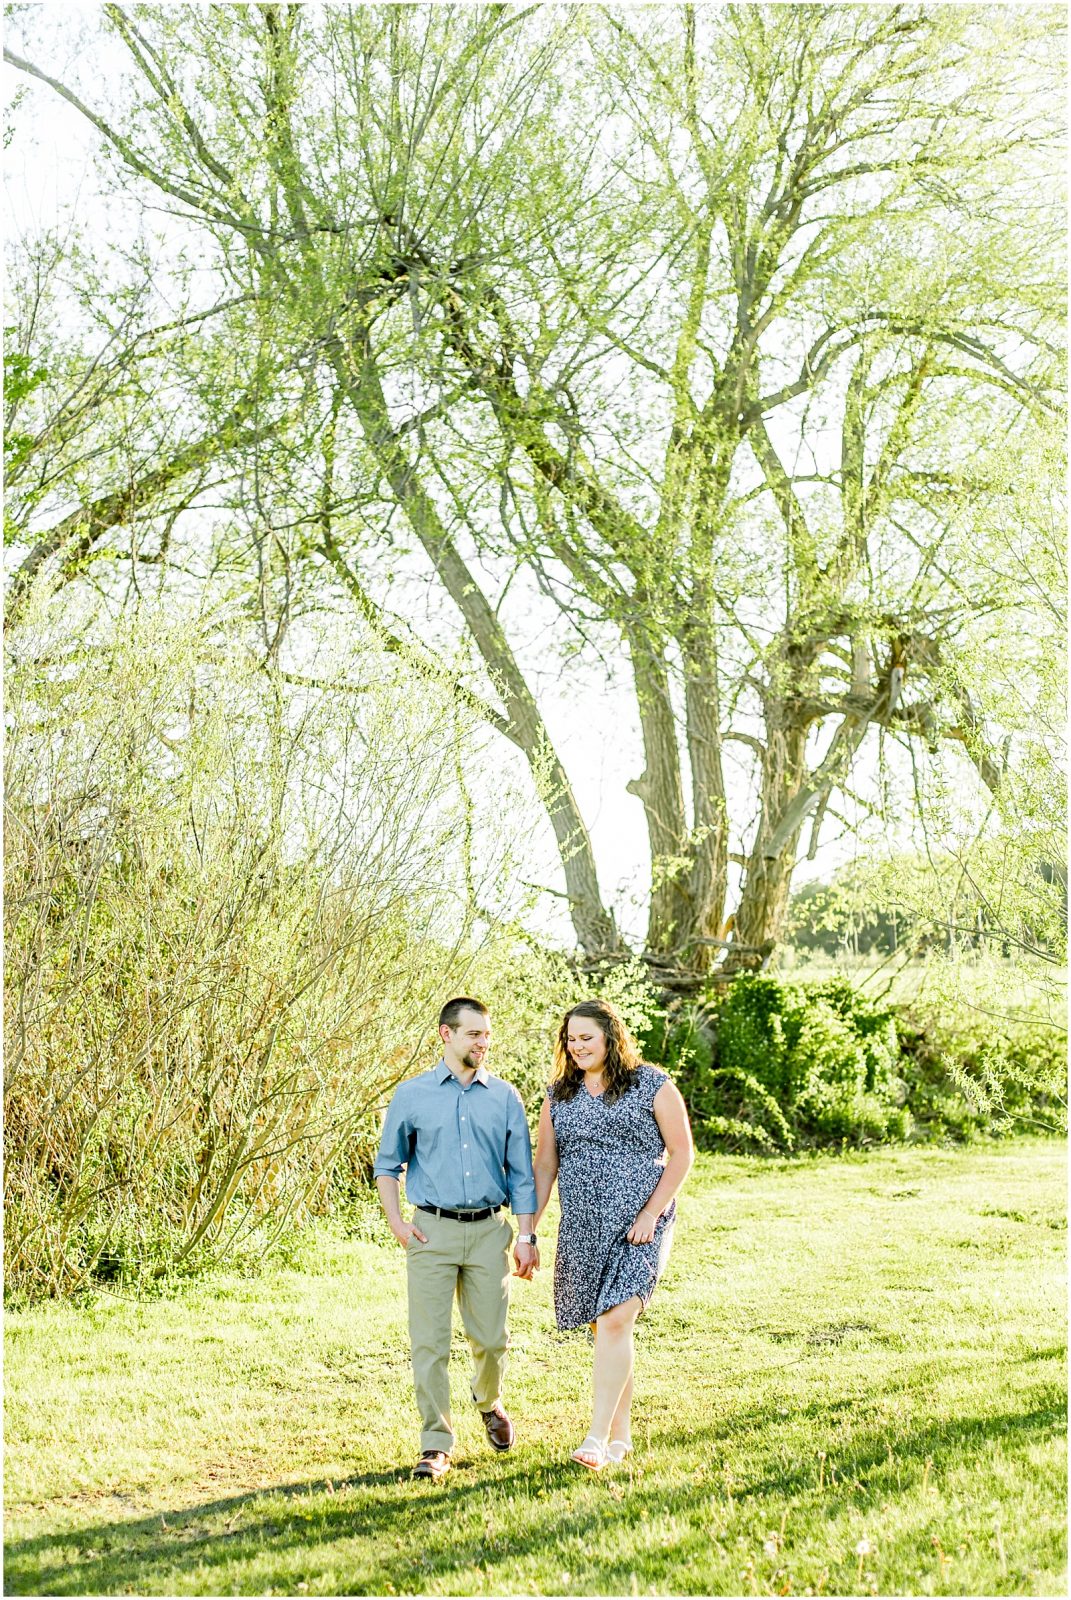 Burgessville Countryside Engagement Session Couple laughing and walking